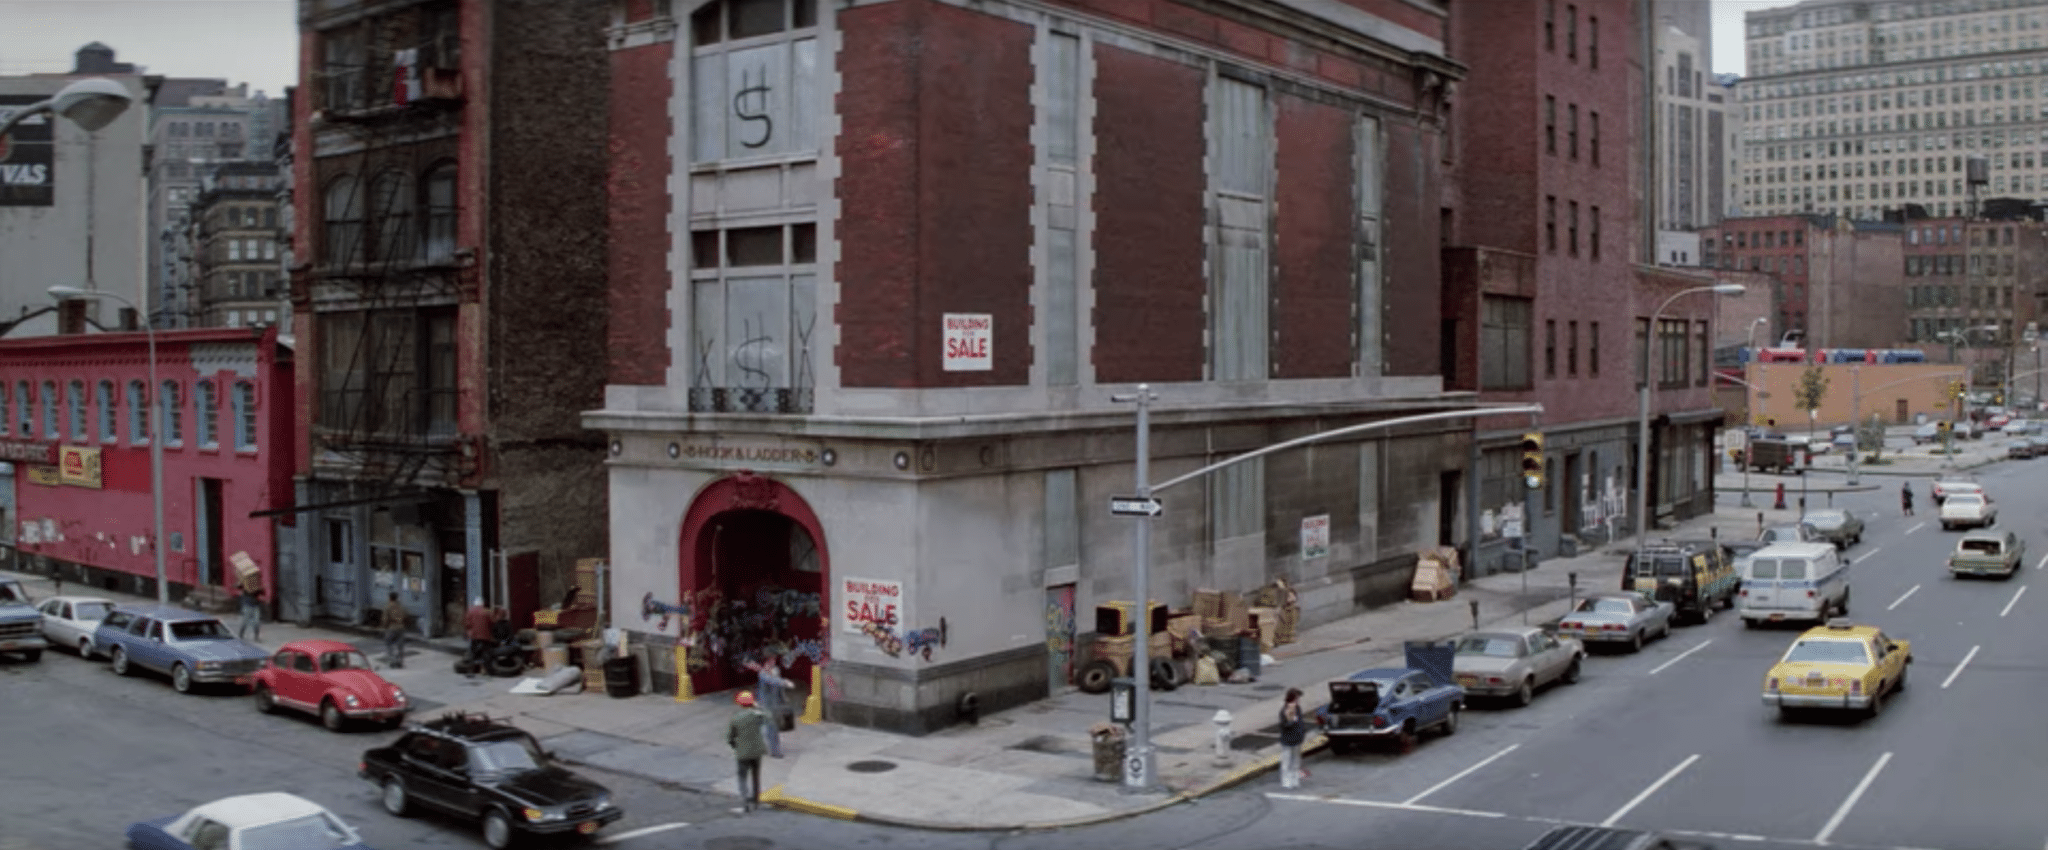 The Ghostbusters firehouse